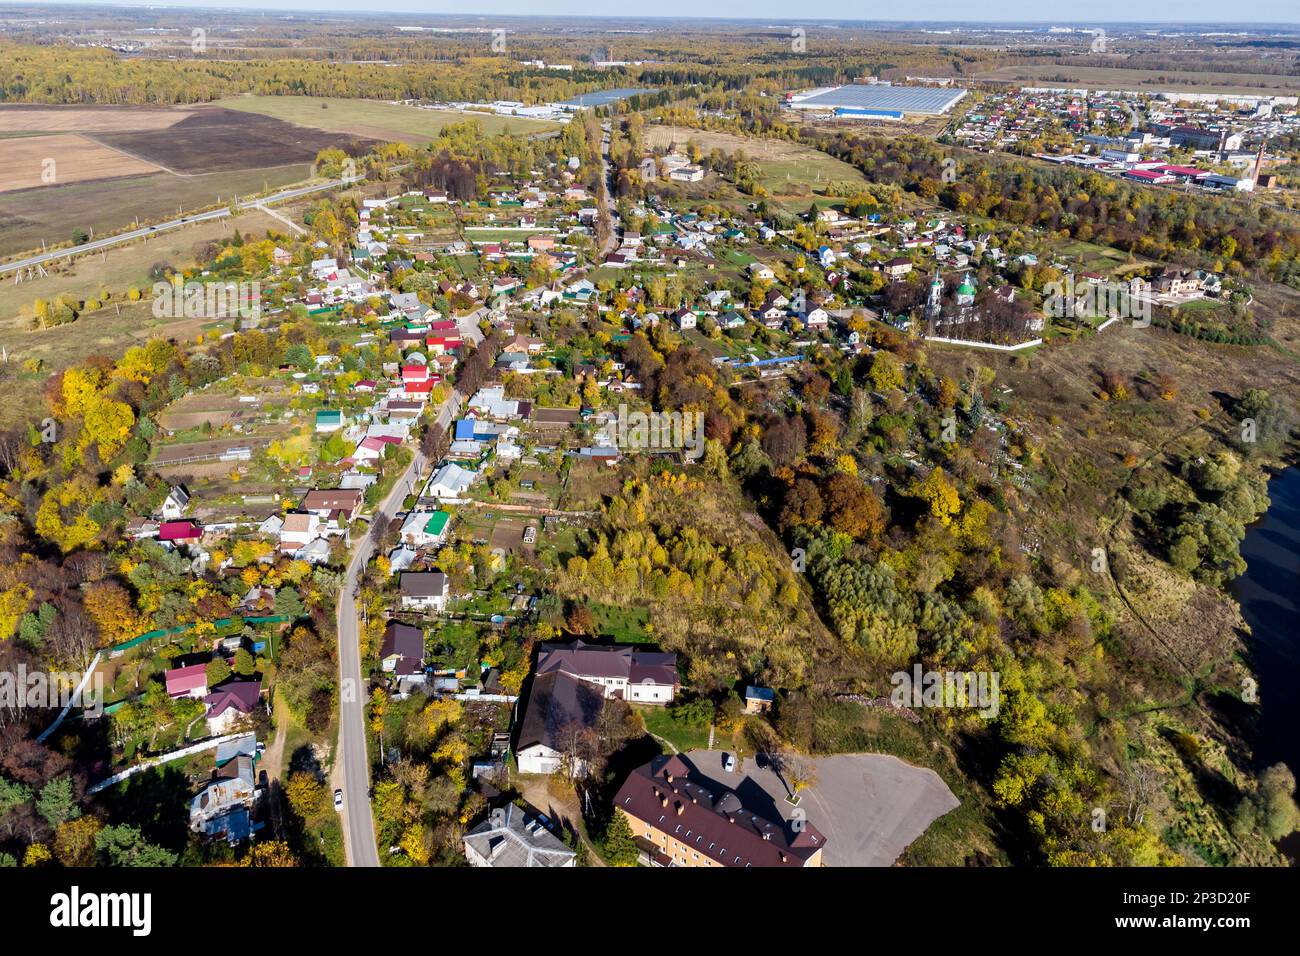 View from a high altitude of rural buildings in the Roshcha microdistrict on the outskirts of the city of Borovsk, Russia Stock Photo